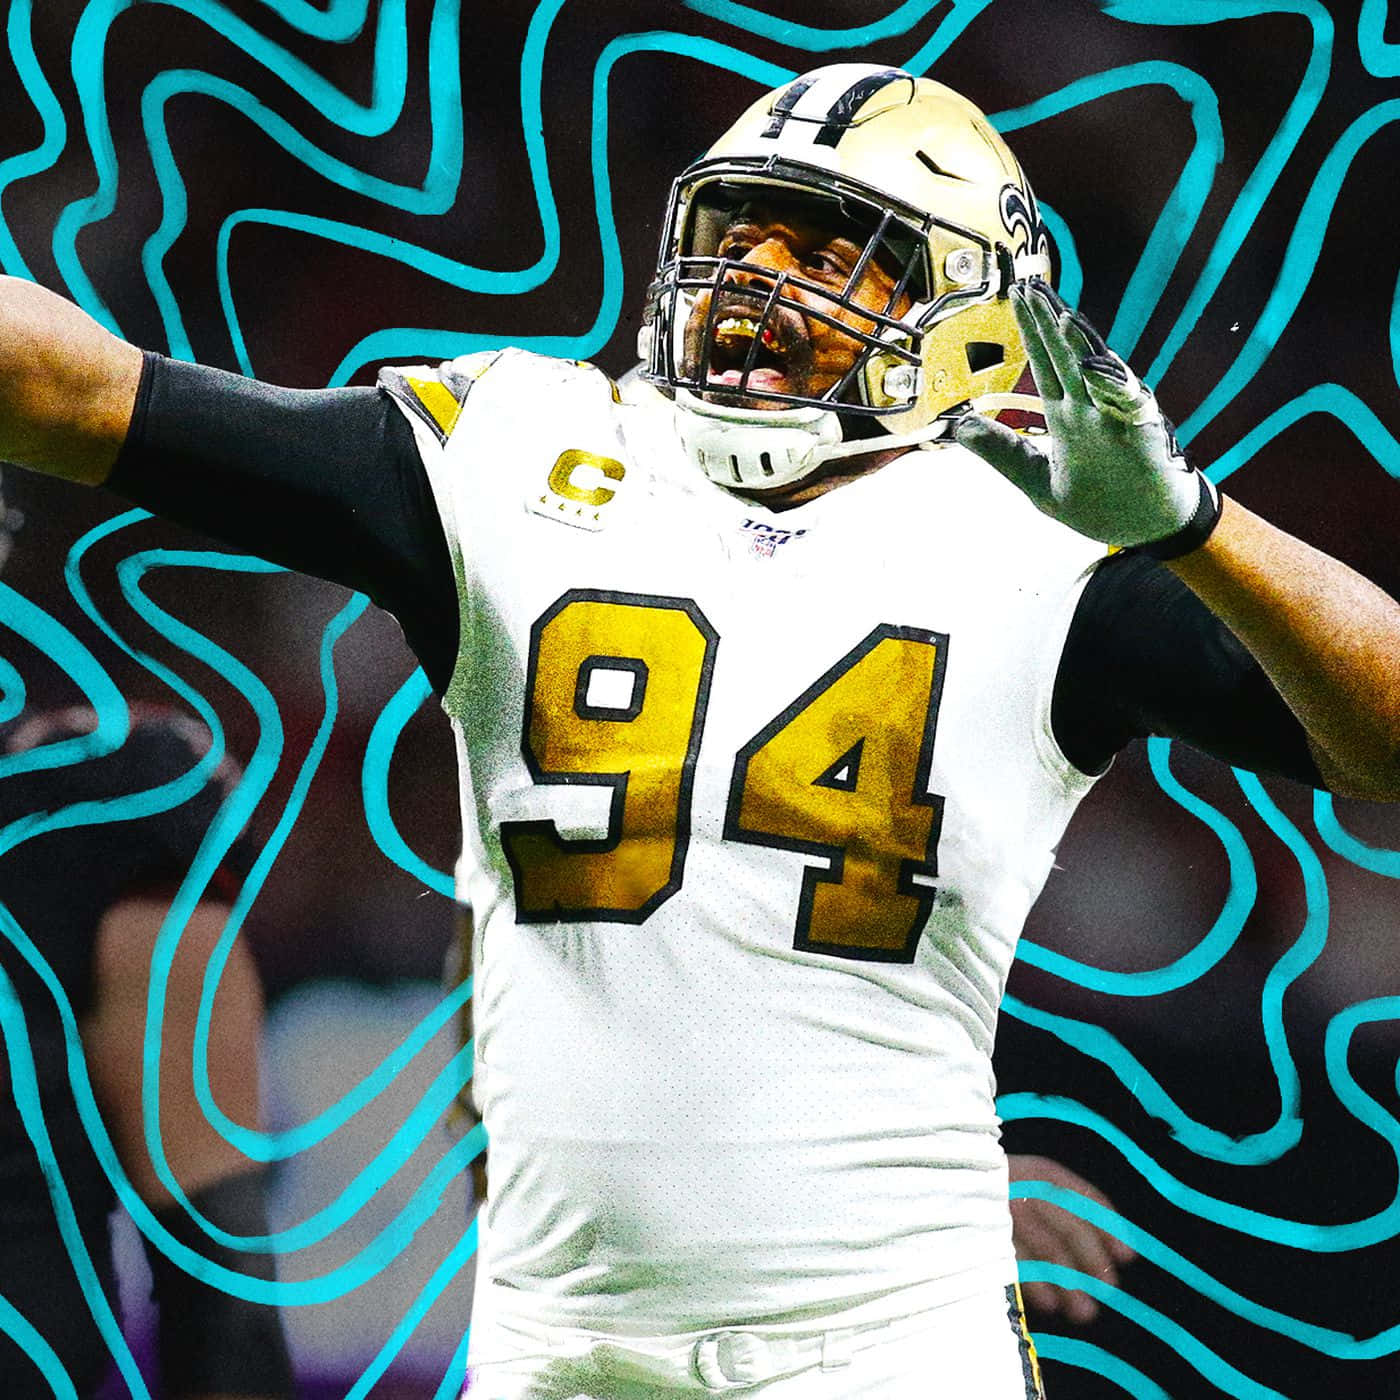 Cameronjordan Hoppar - (this Would Be A Suitable Translation For A Computer Or Mobile Wallpaper Featuring Cameron Jordan Jumping) Wallpaper